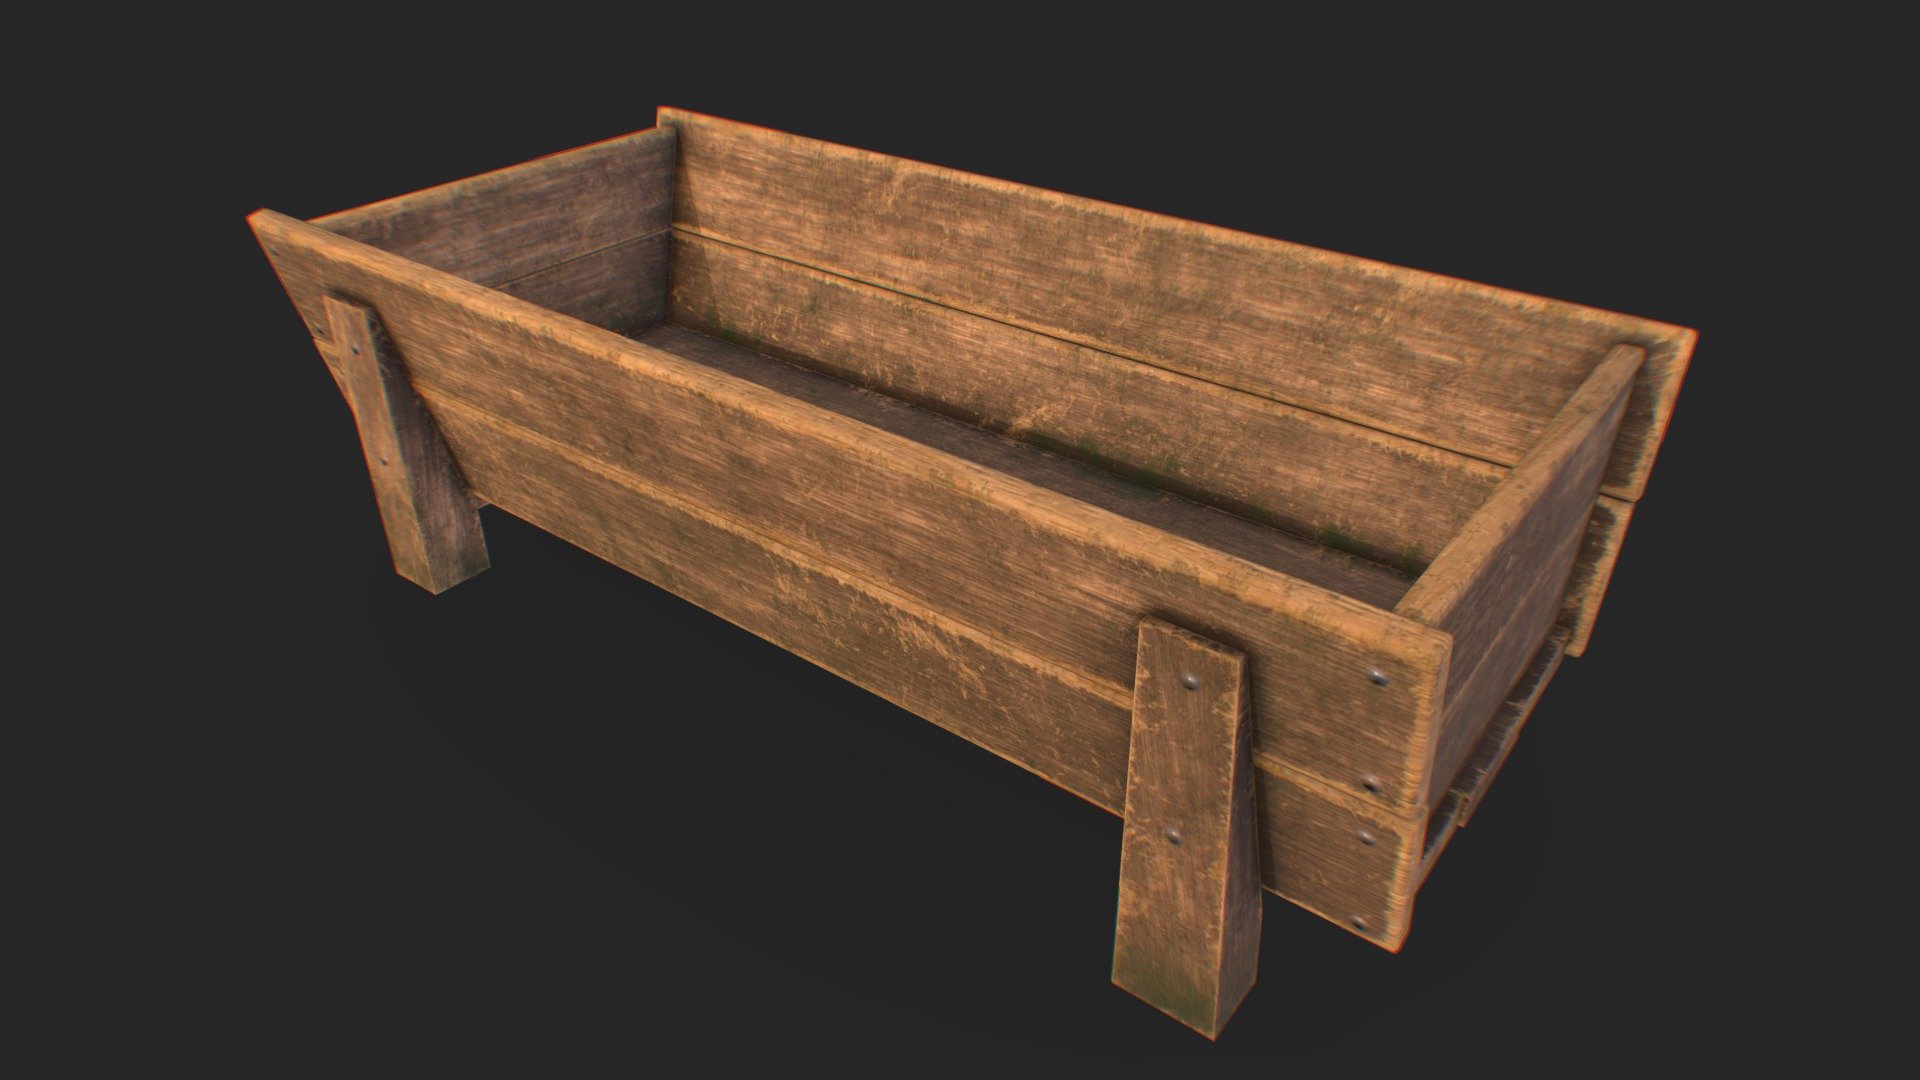 Medieval farm feeding trough (Manger). Low poly and game-ready. This structure was used for feeding animals 3d model